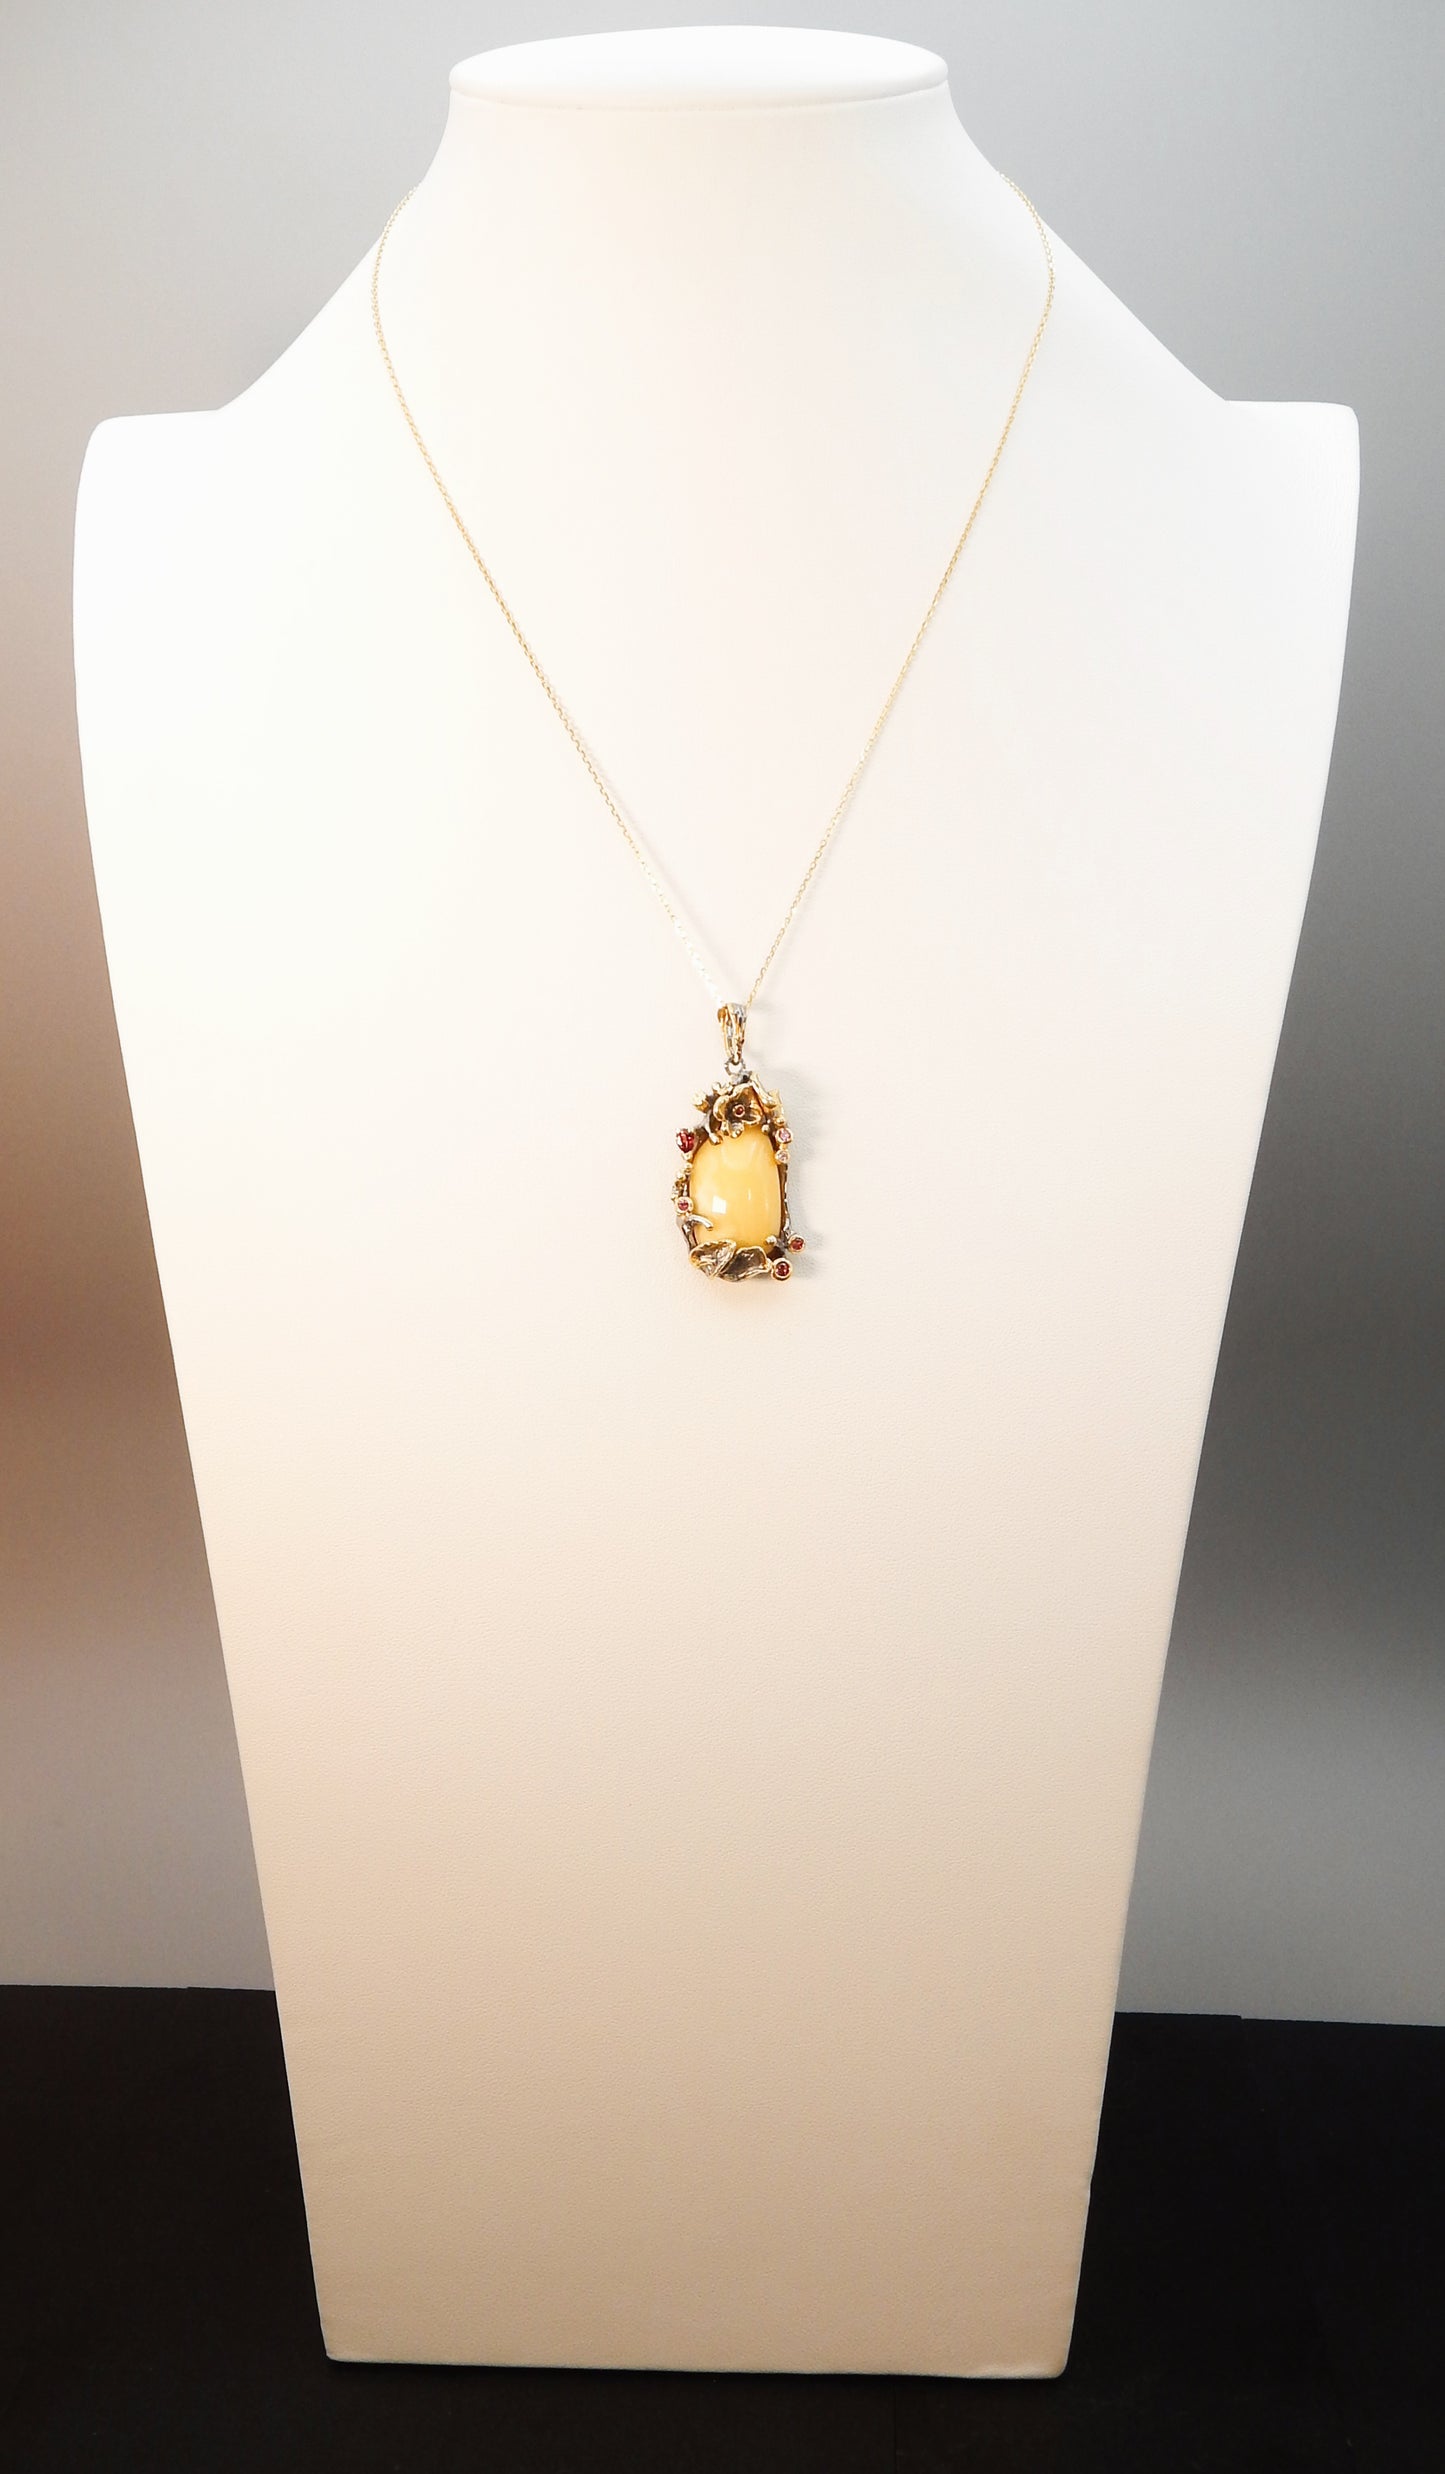 Natural Baltic Butterscotch Amber Sleepy Hallow Limited Edition Pendant Necklace